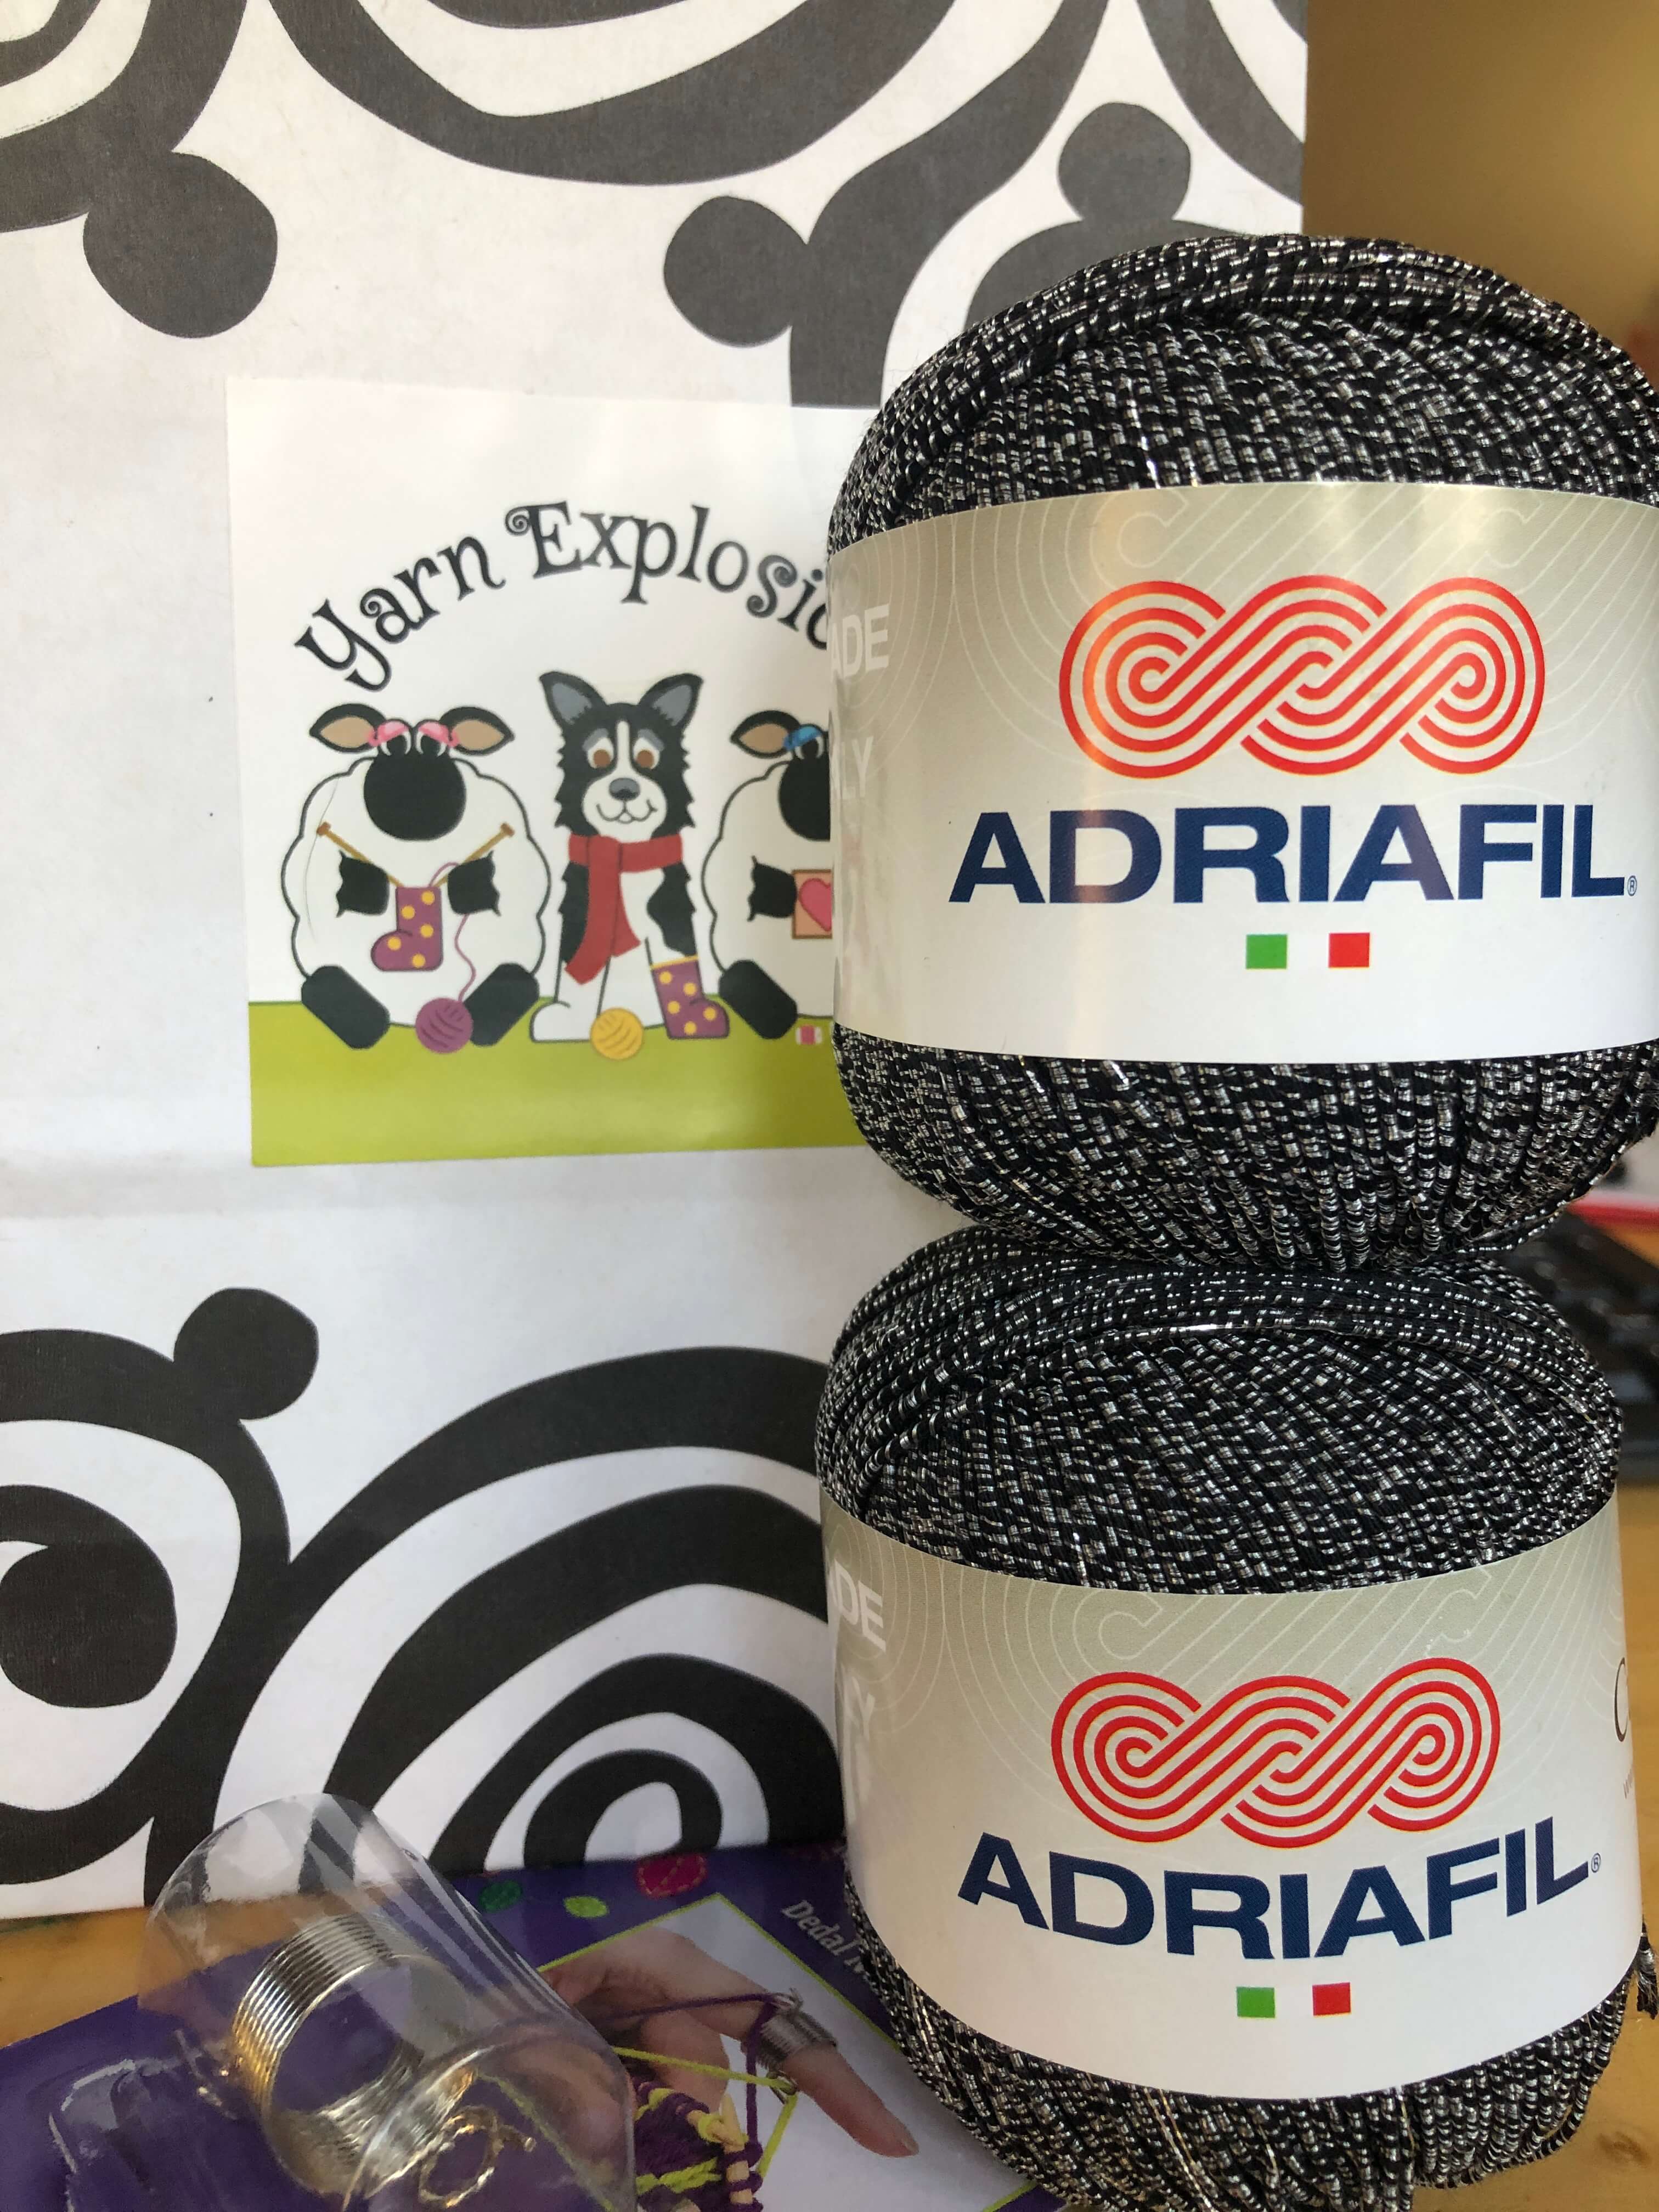 a close shot of a bag reading "Yarn Explosion" next to a textured ball of reflective yarn (Adriafil Cupido)